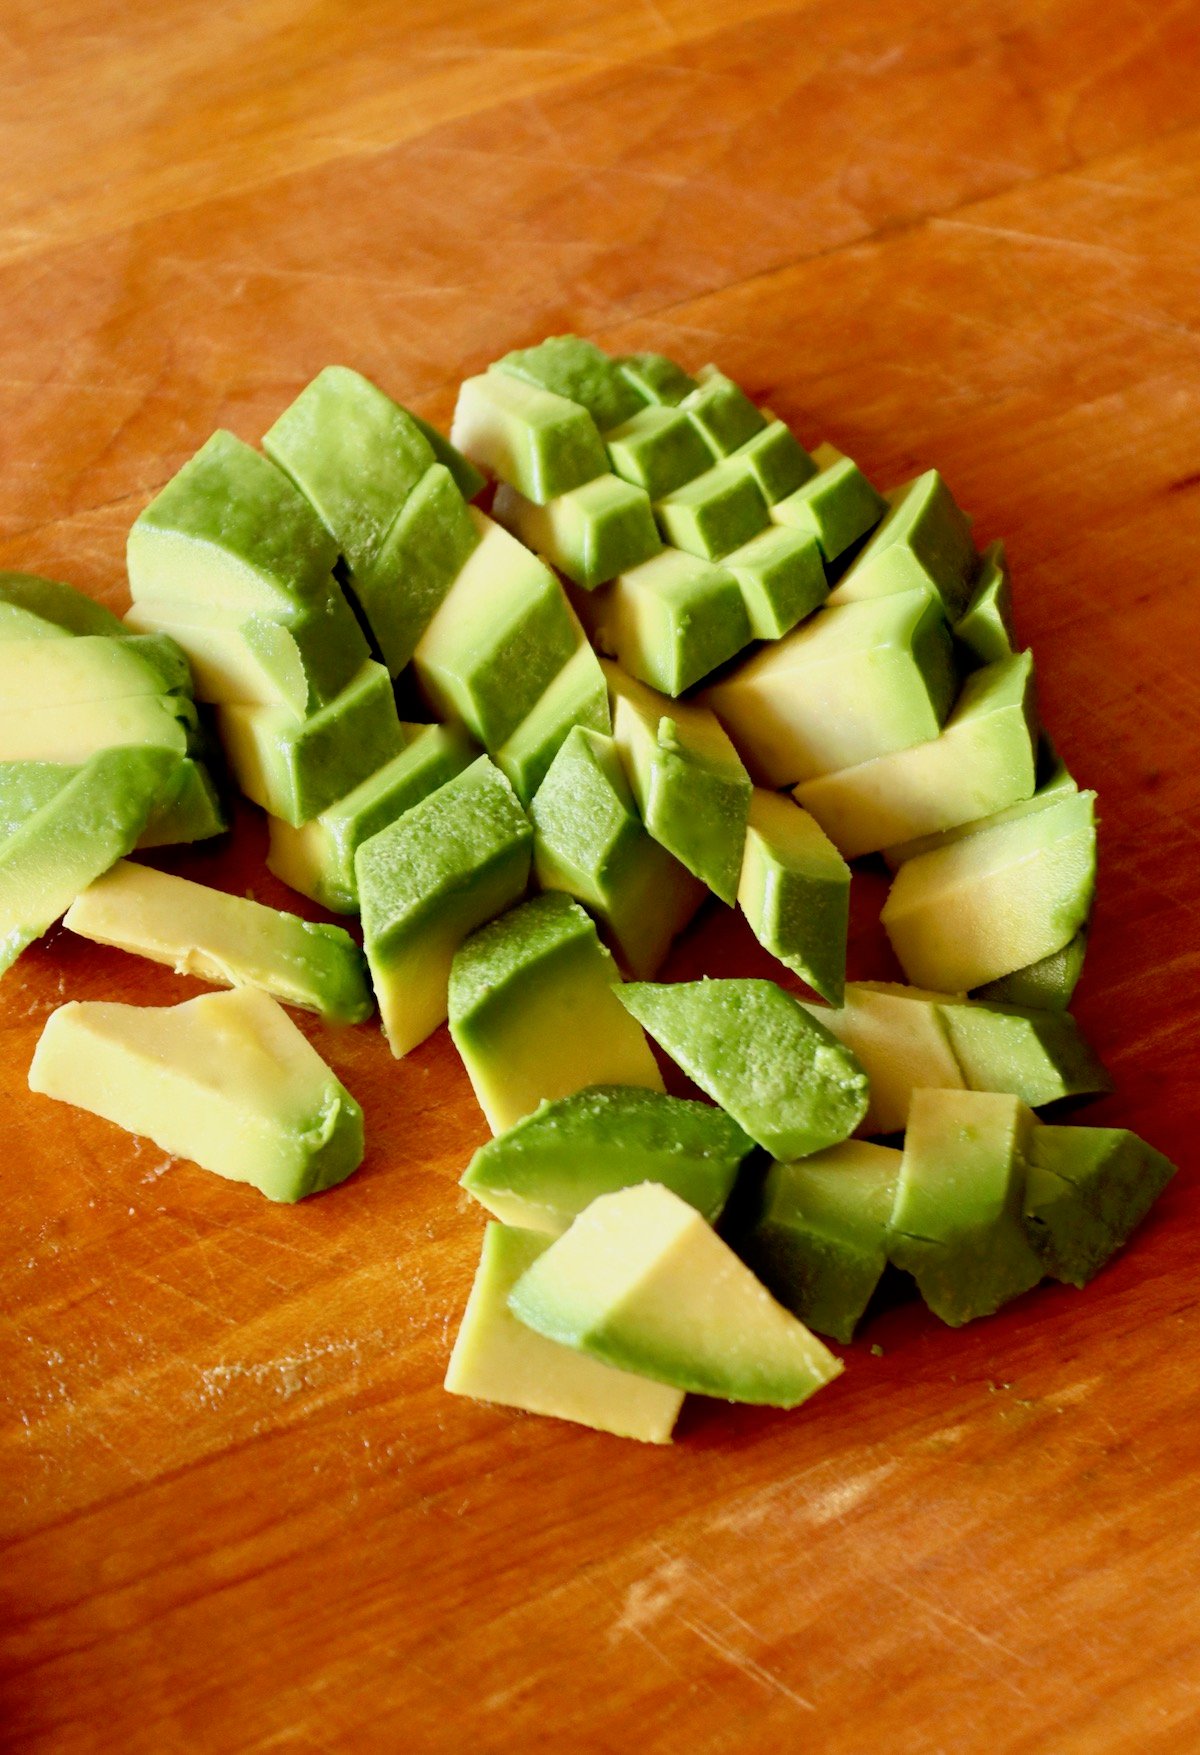 Peeled and diced avocado on a wooden cutting board.